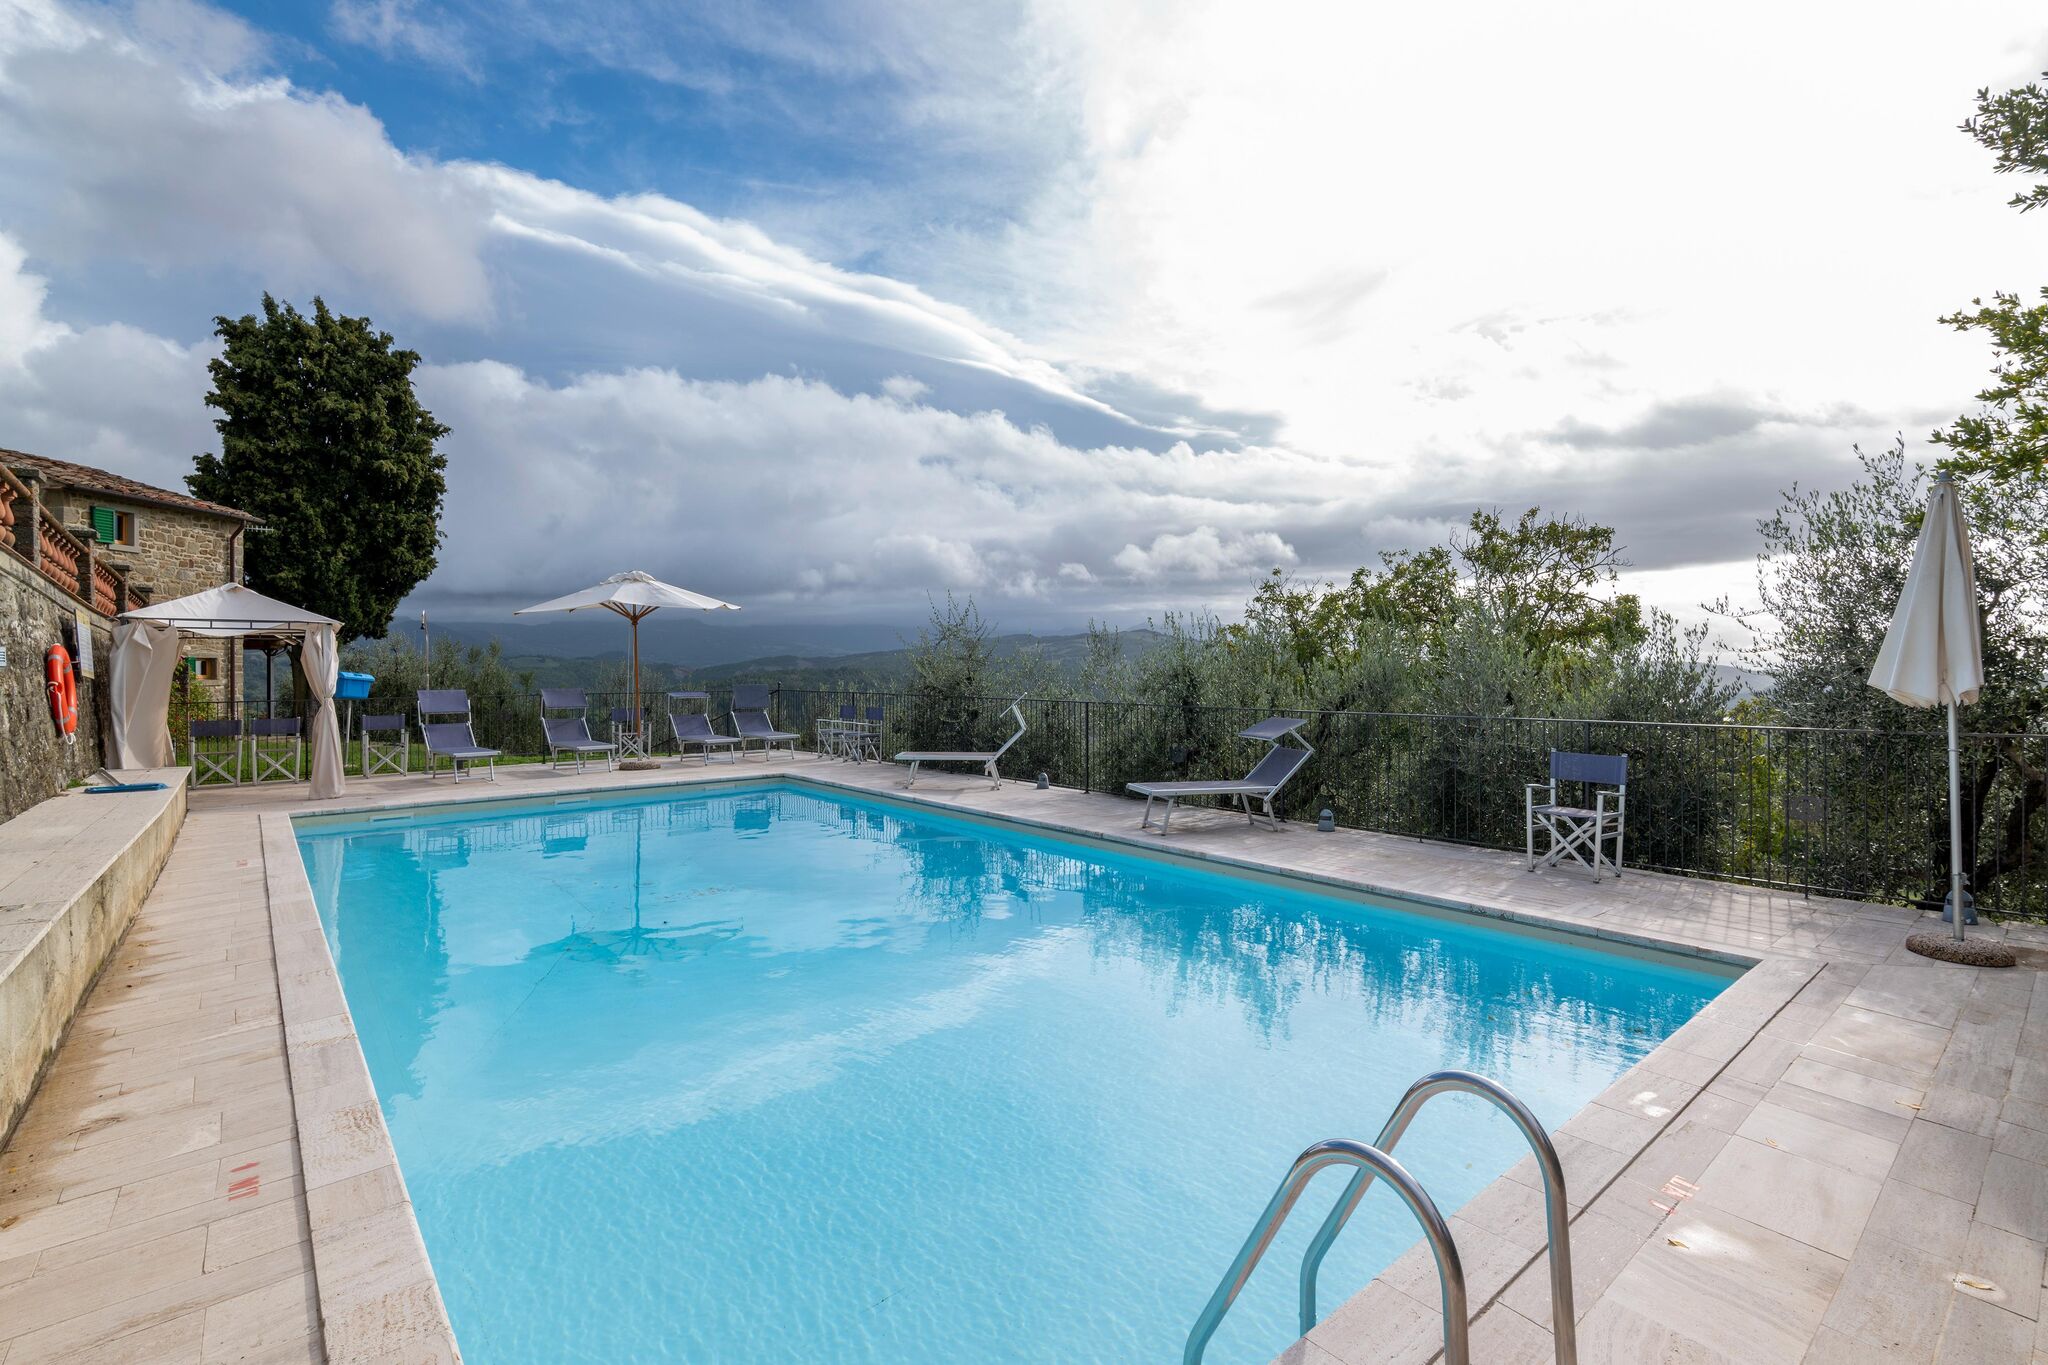 Historic farmhouse with swimming pool, in Michelangelo's places